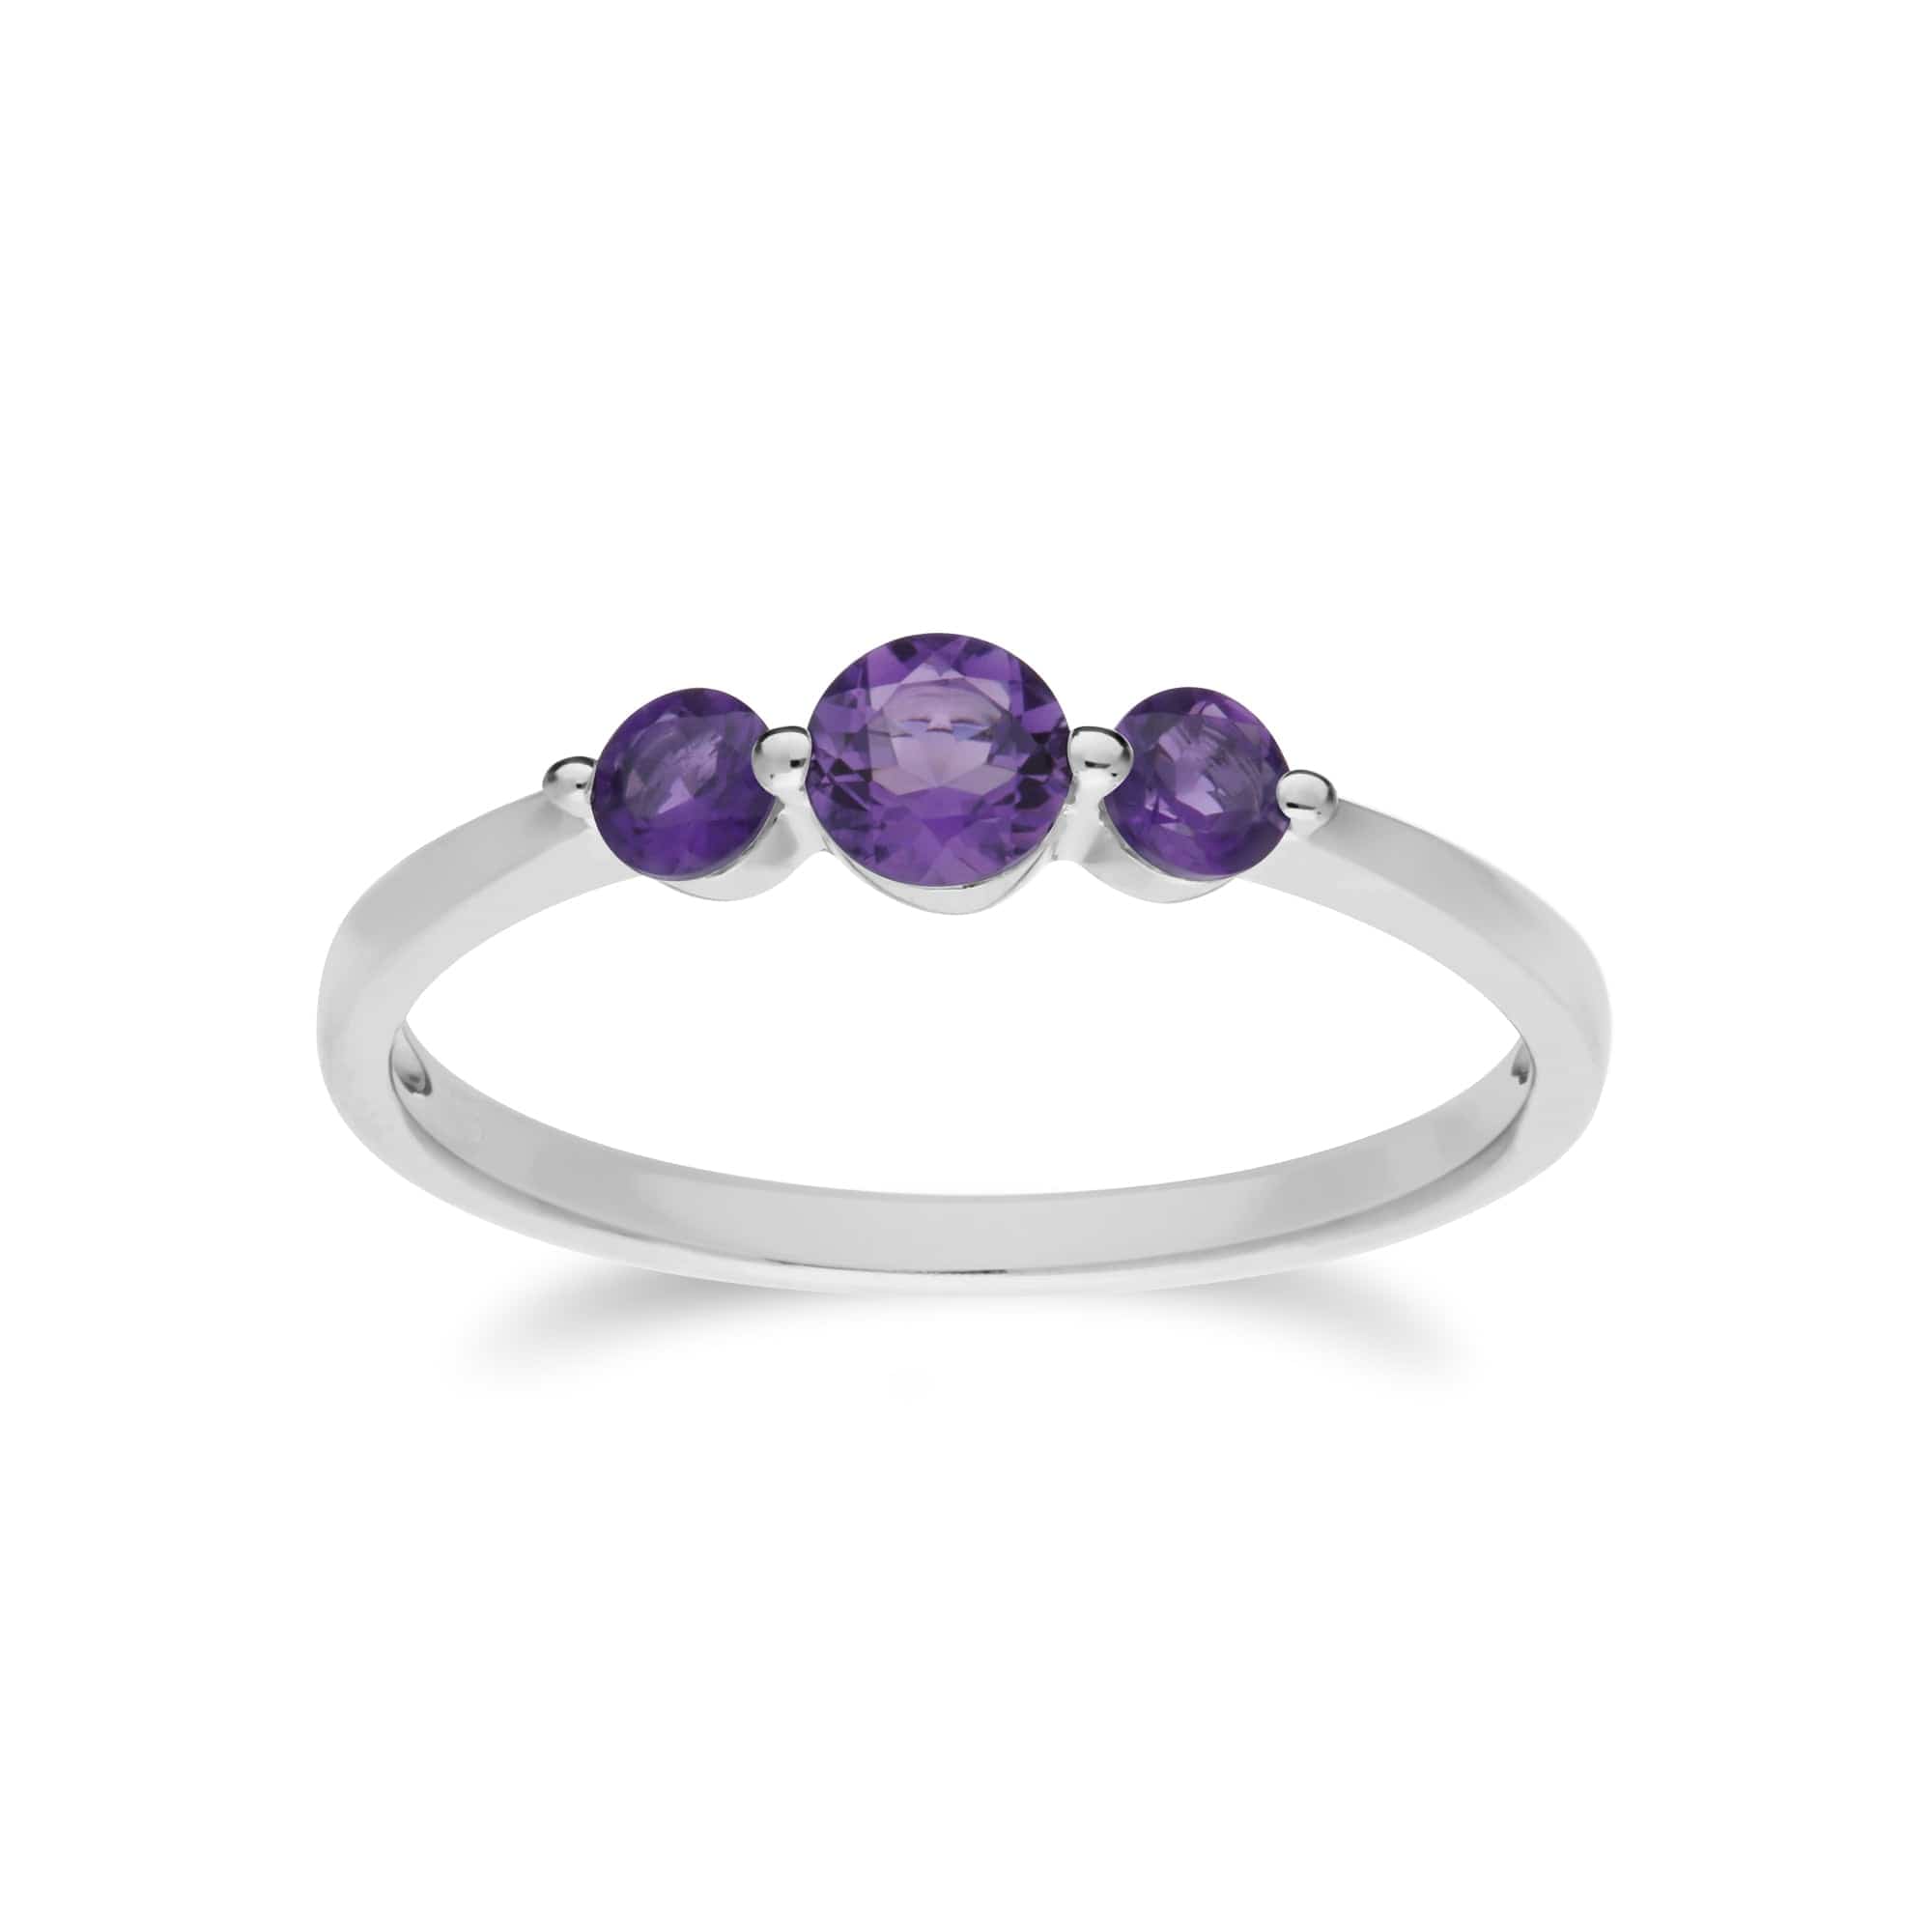 270E025503925-270R056003925 Classic Round Amethyst Three Stone Gradient Earrings & Ring Set in 925 Sterling Silver 3